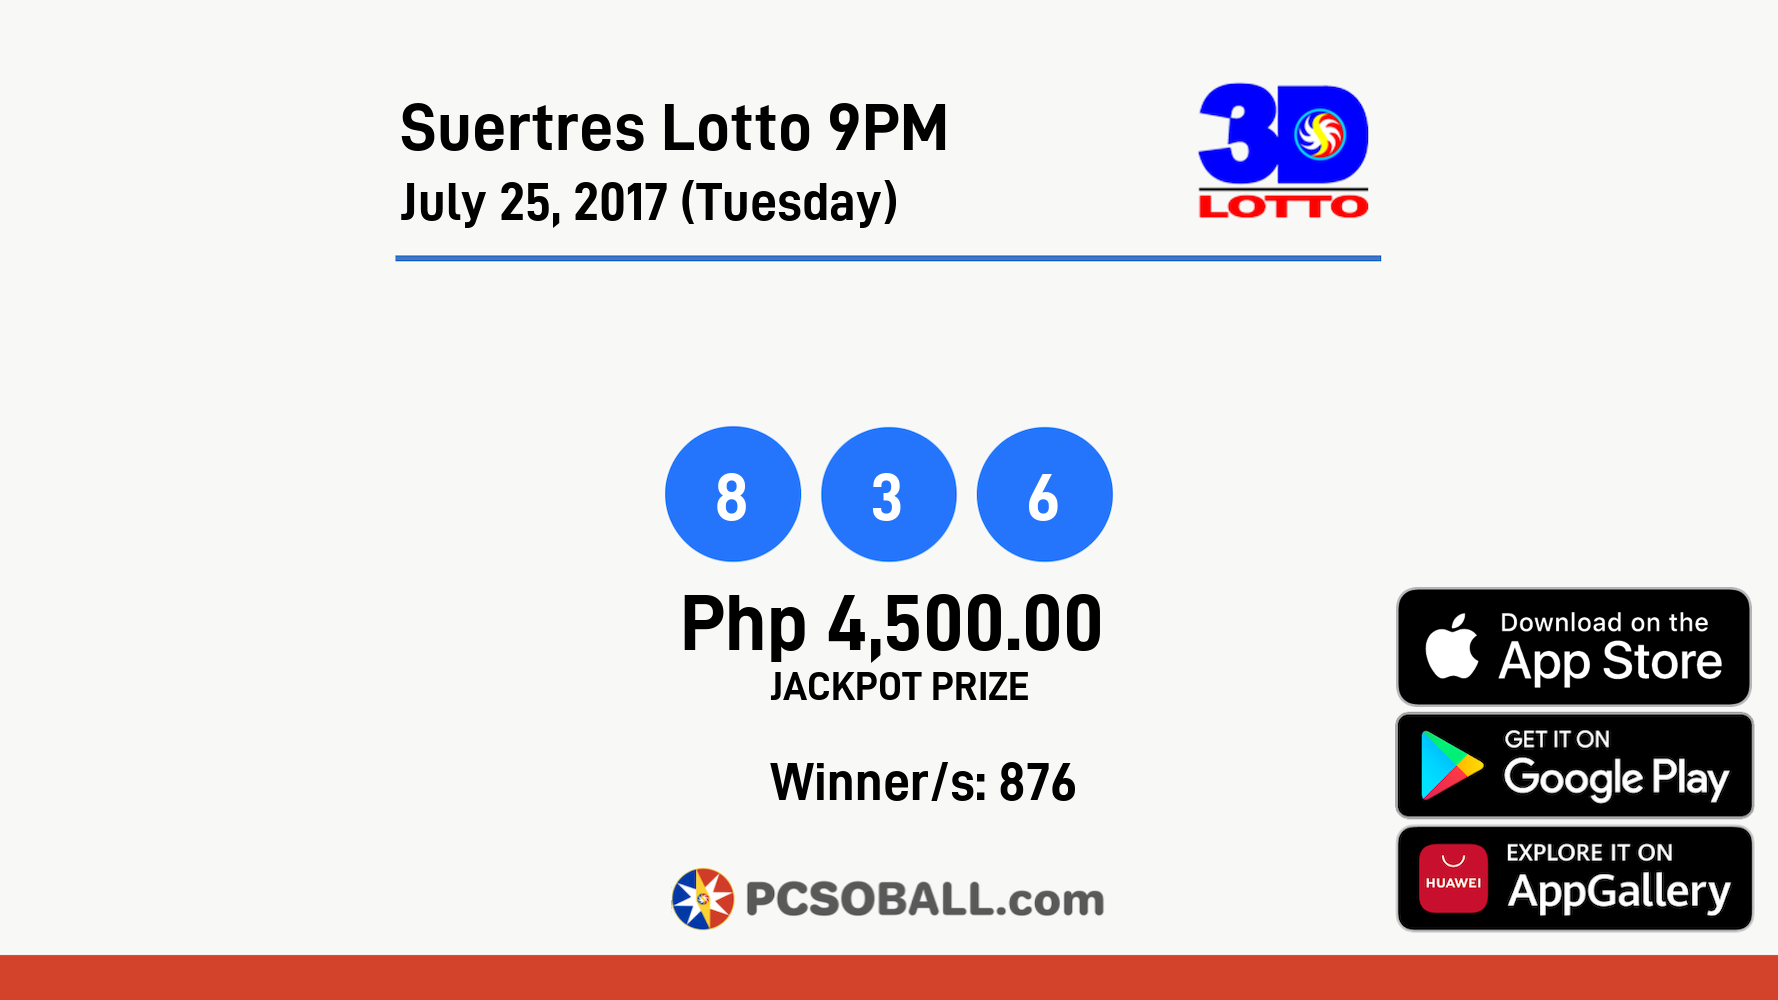 Suertres Lotto 9PM July 25, 2017 (Tuesday) Result